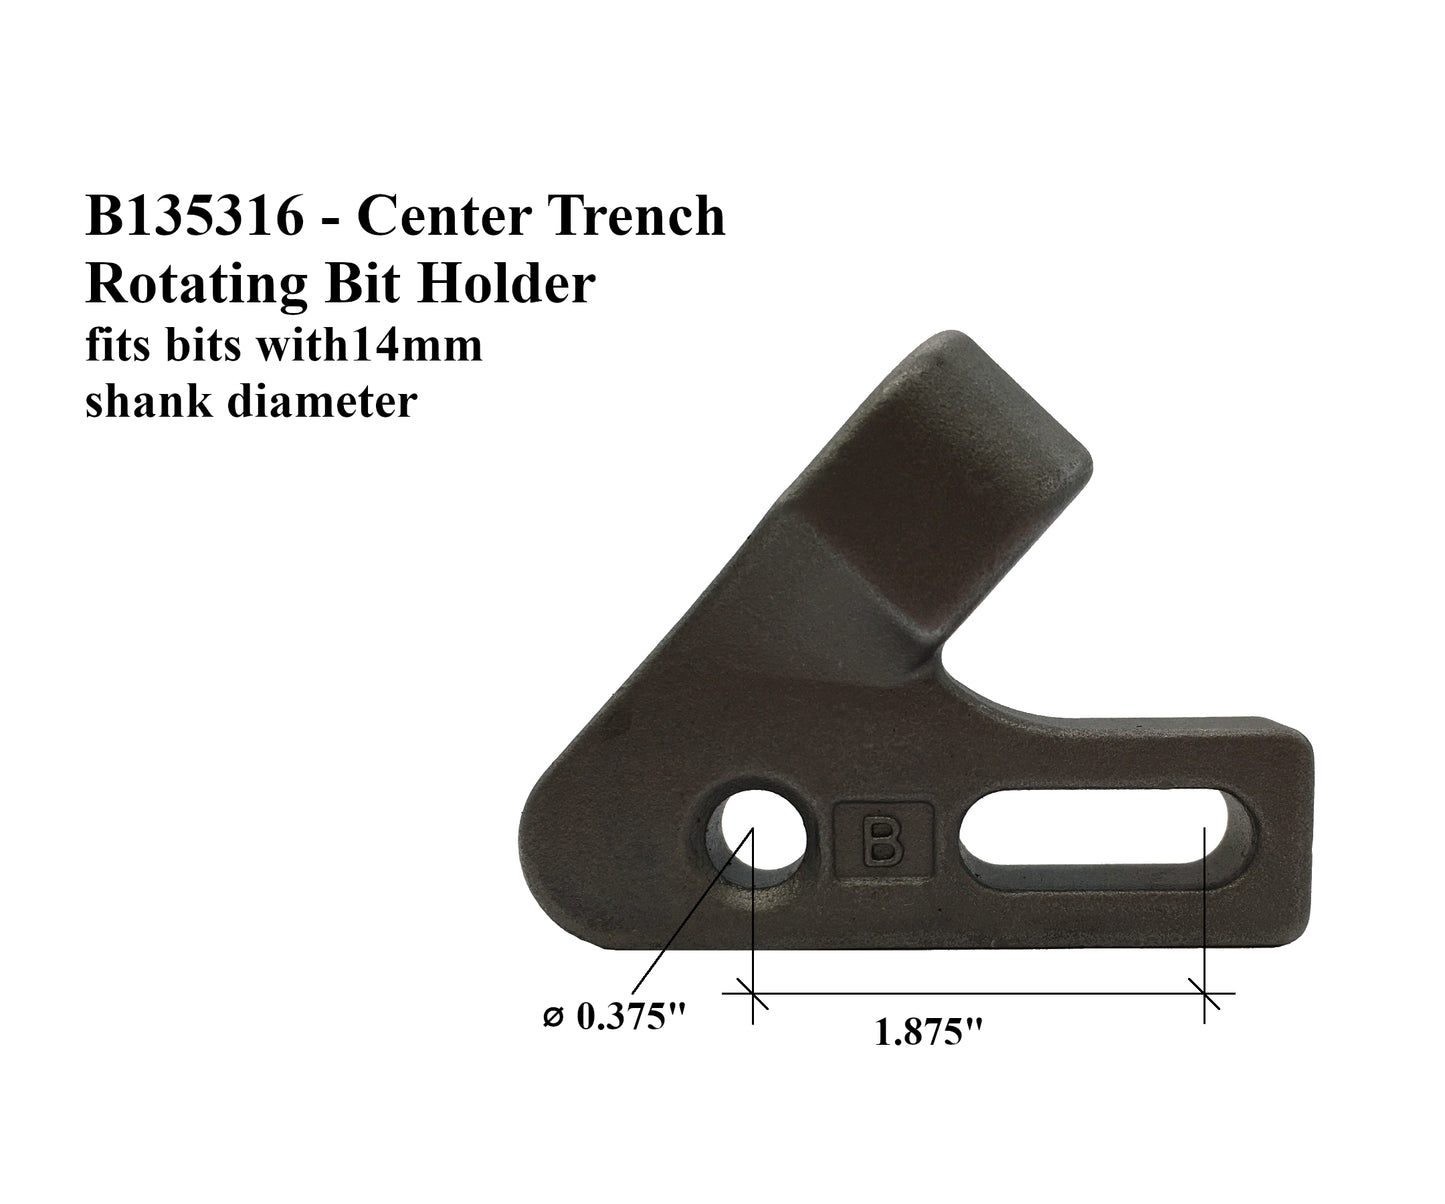 L.H. 4" Cut, Rotating Bit Holder, 135317, for many small Chain Trenchers